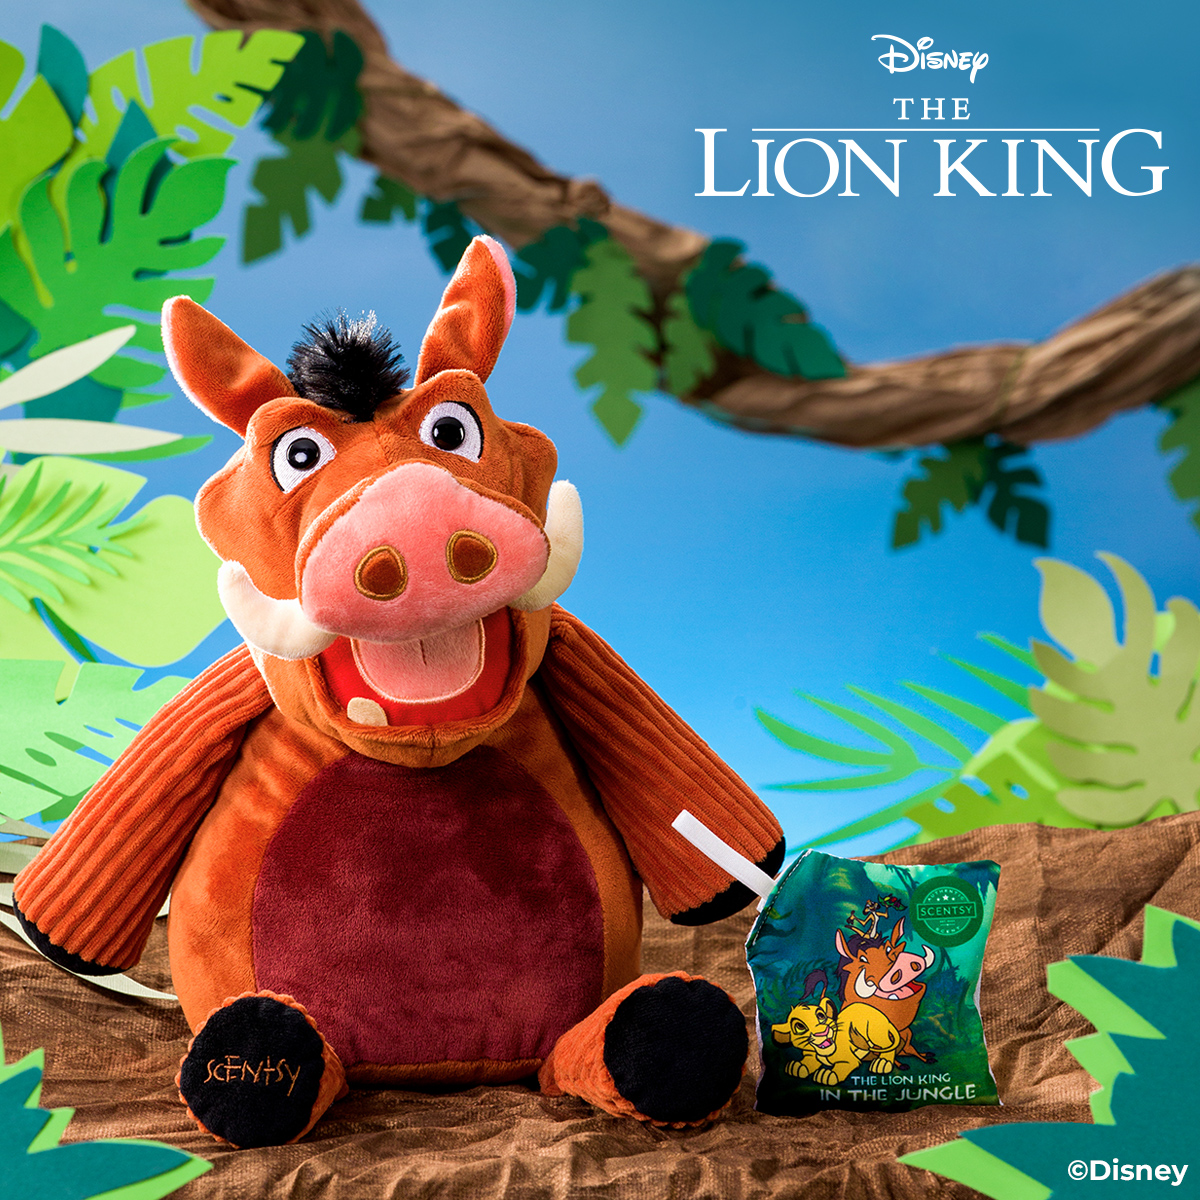 No Scent Pak Details about   Simba Lion King BRAND NEW IN BOX Scentsy Buddy 